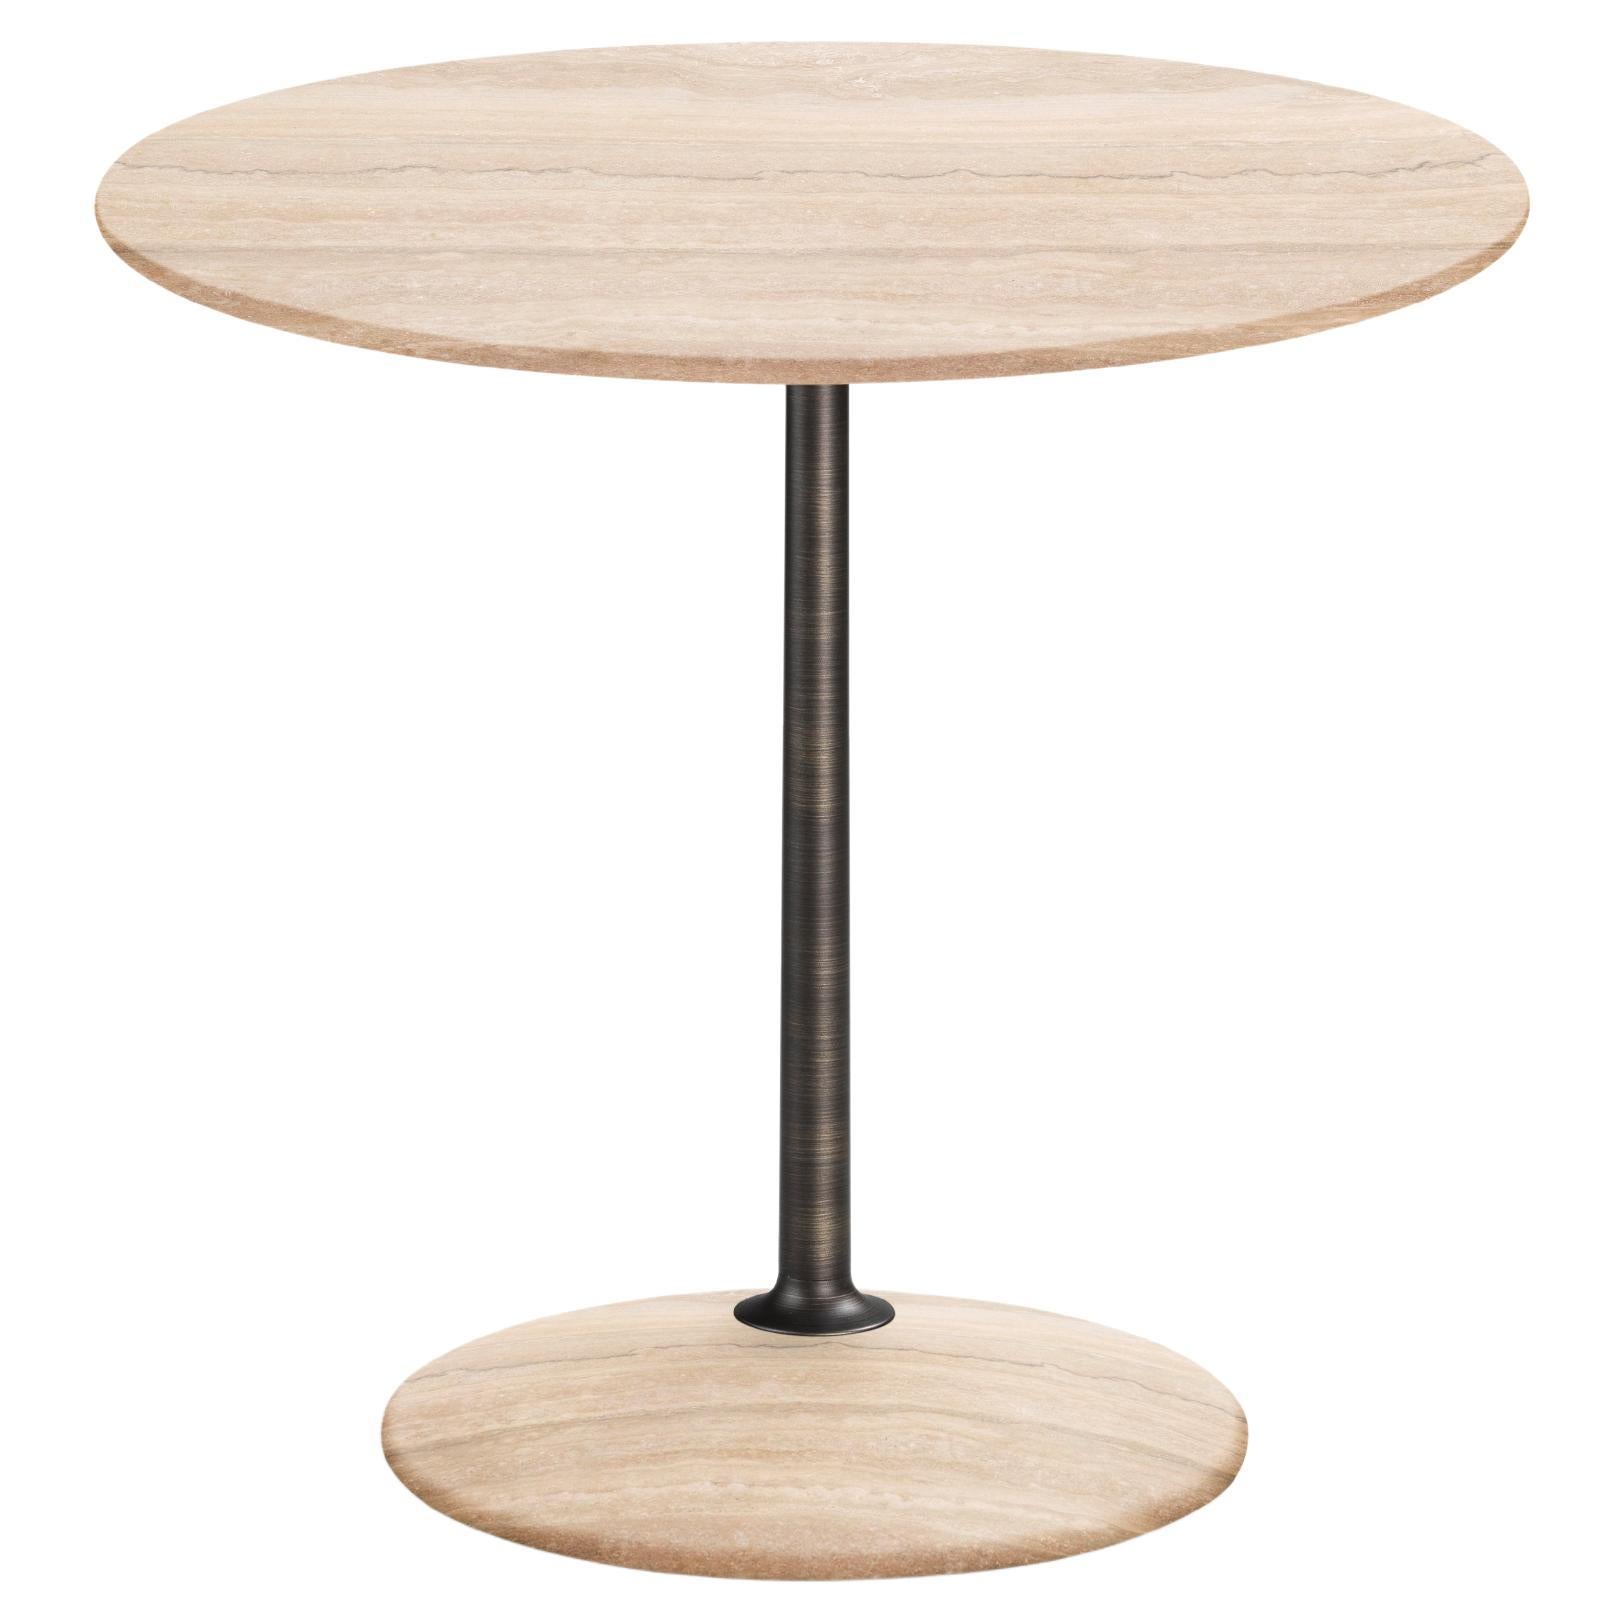 Arnold Short Table, Travertine Top, Burnished Brass Structure, Made in Italy